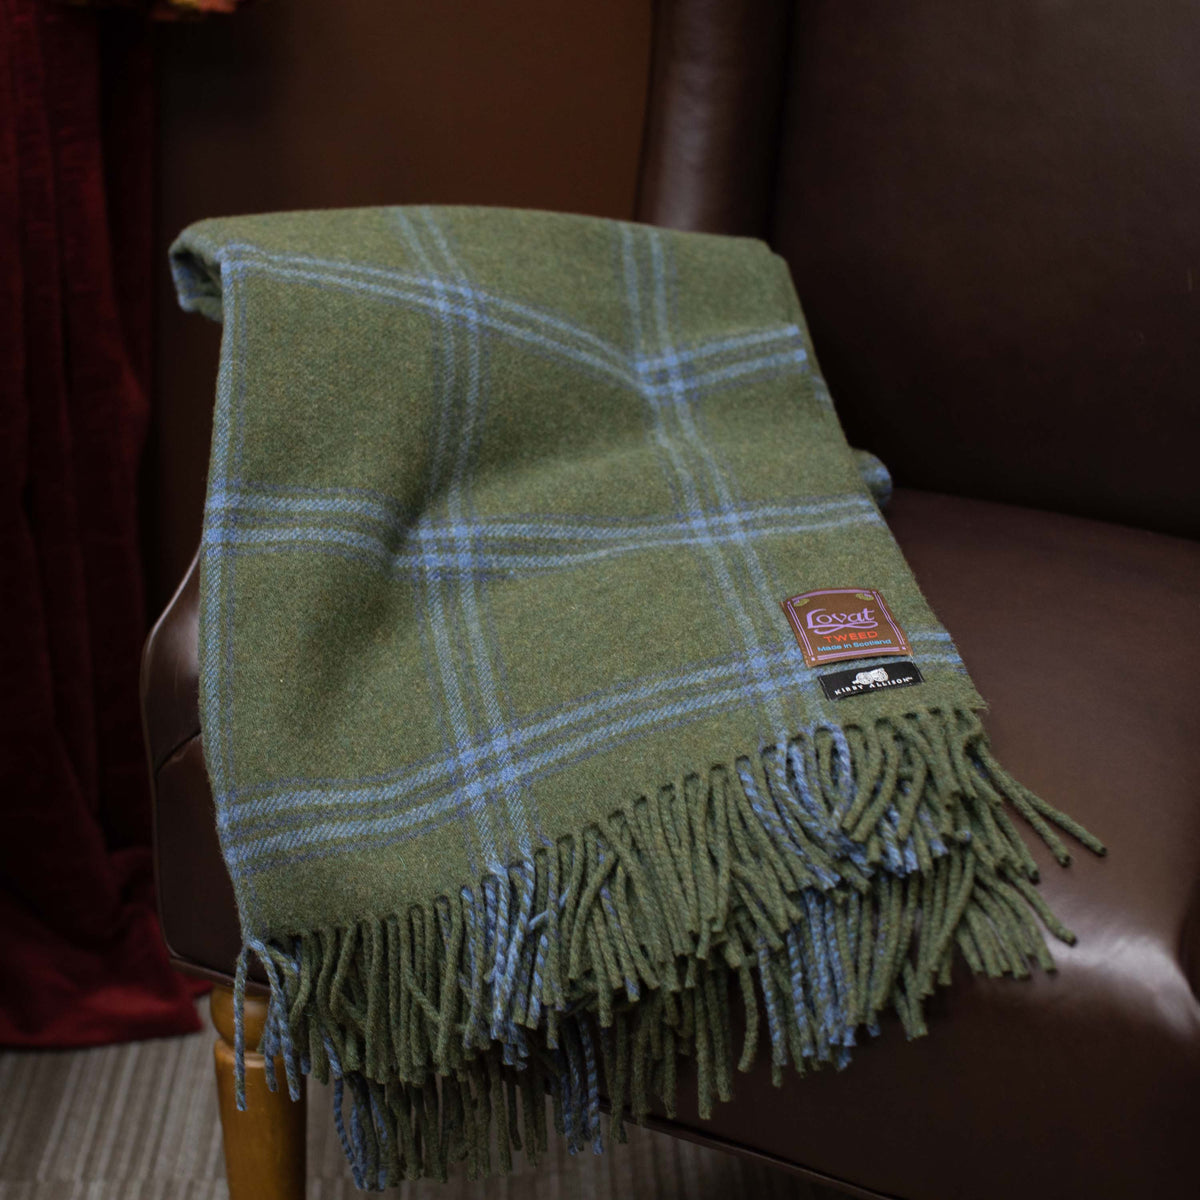 A new Lovat Mill Kirby Allison Suit to Shoot Tweed wool throw blanket in green and blue plaid, inspired by Scotland, on a chair.